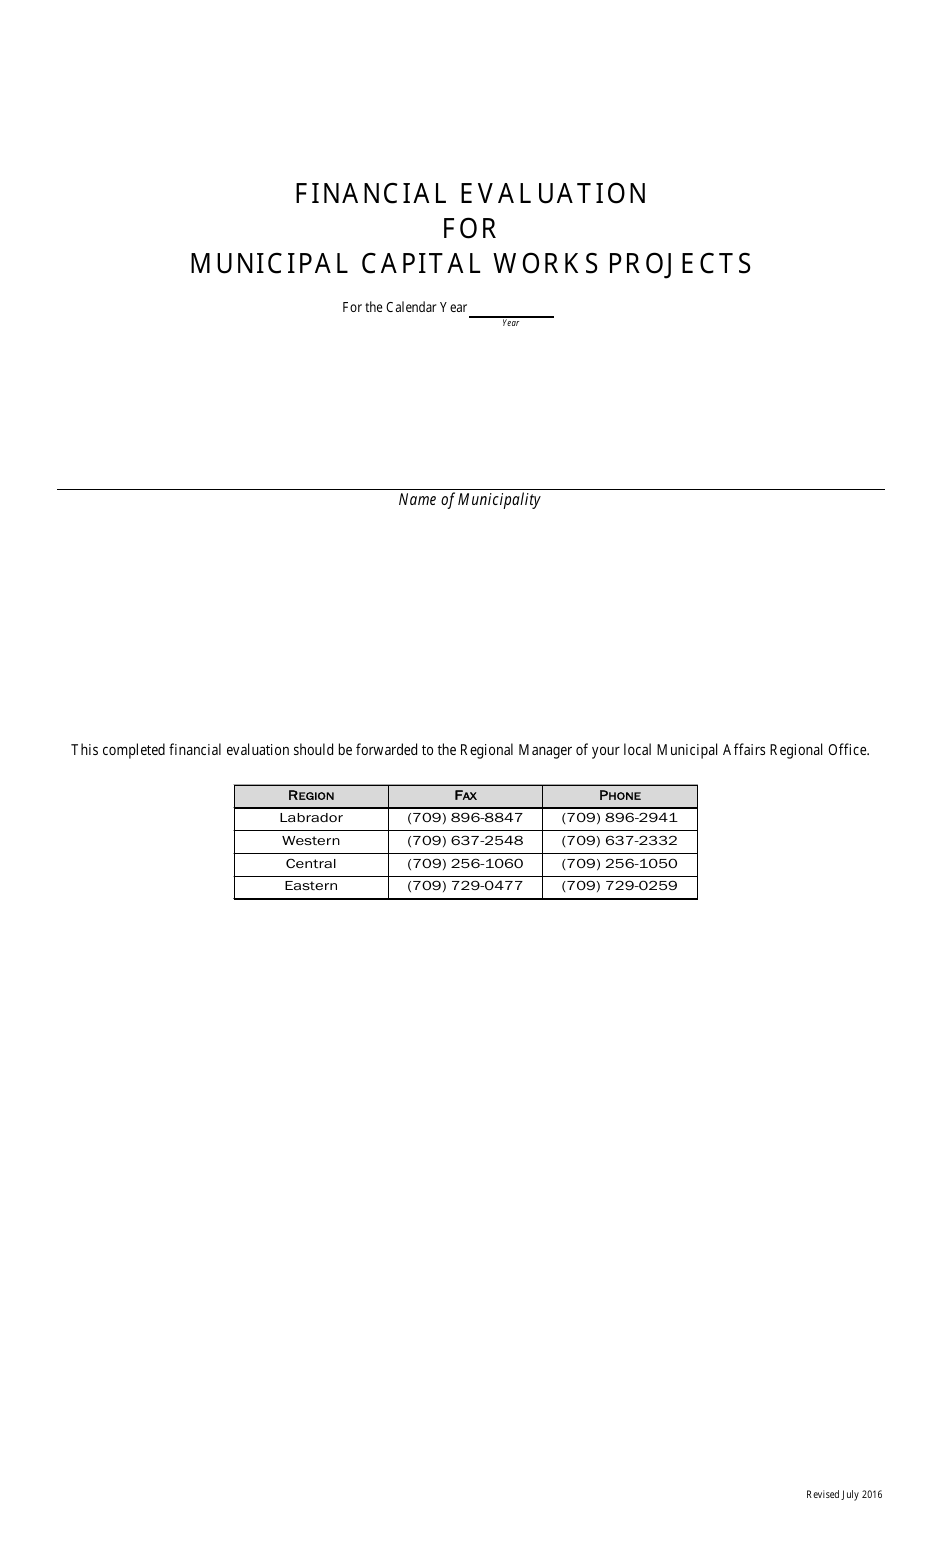 Financial Evaluation for Municipal Capital Works Projects - Newfoundland and Labrador, Canada, Page 1